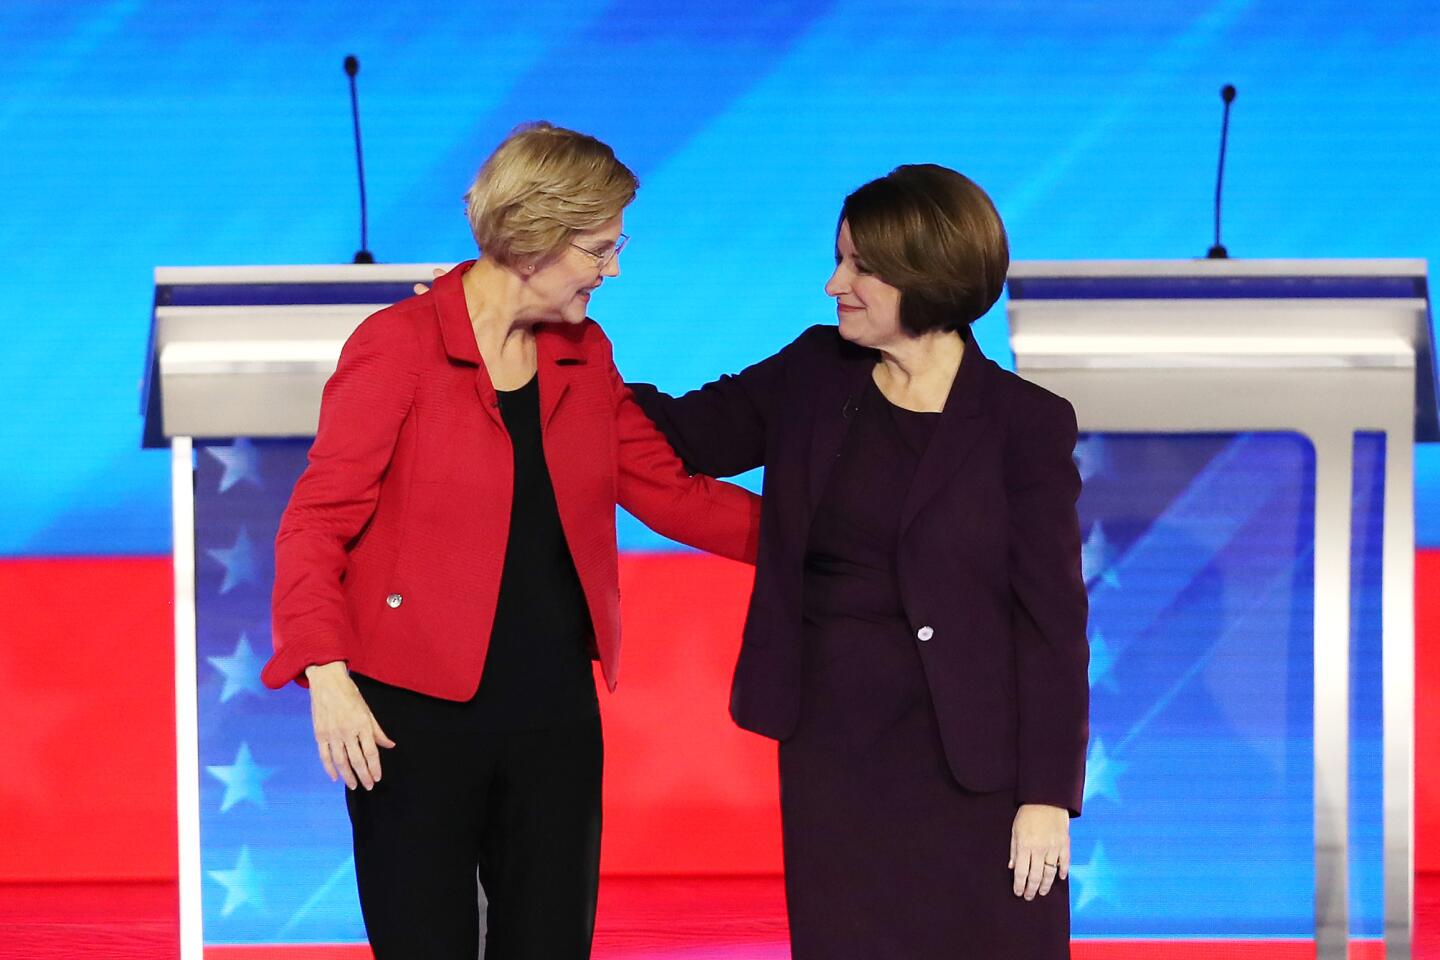 Democratic presidential candidates Sen. Elizabeth Warren (D-Mass.), left, and Sen. Amy Klobuchar (D-Minn.) greet each prior to the start of the Democratic presidential primary debate at St. Anselm College on Friday in Manchester, N.H.